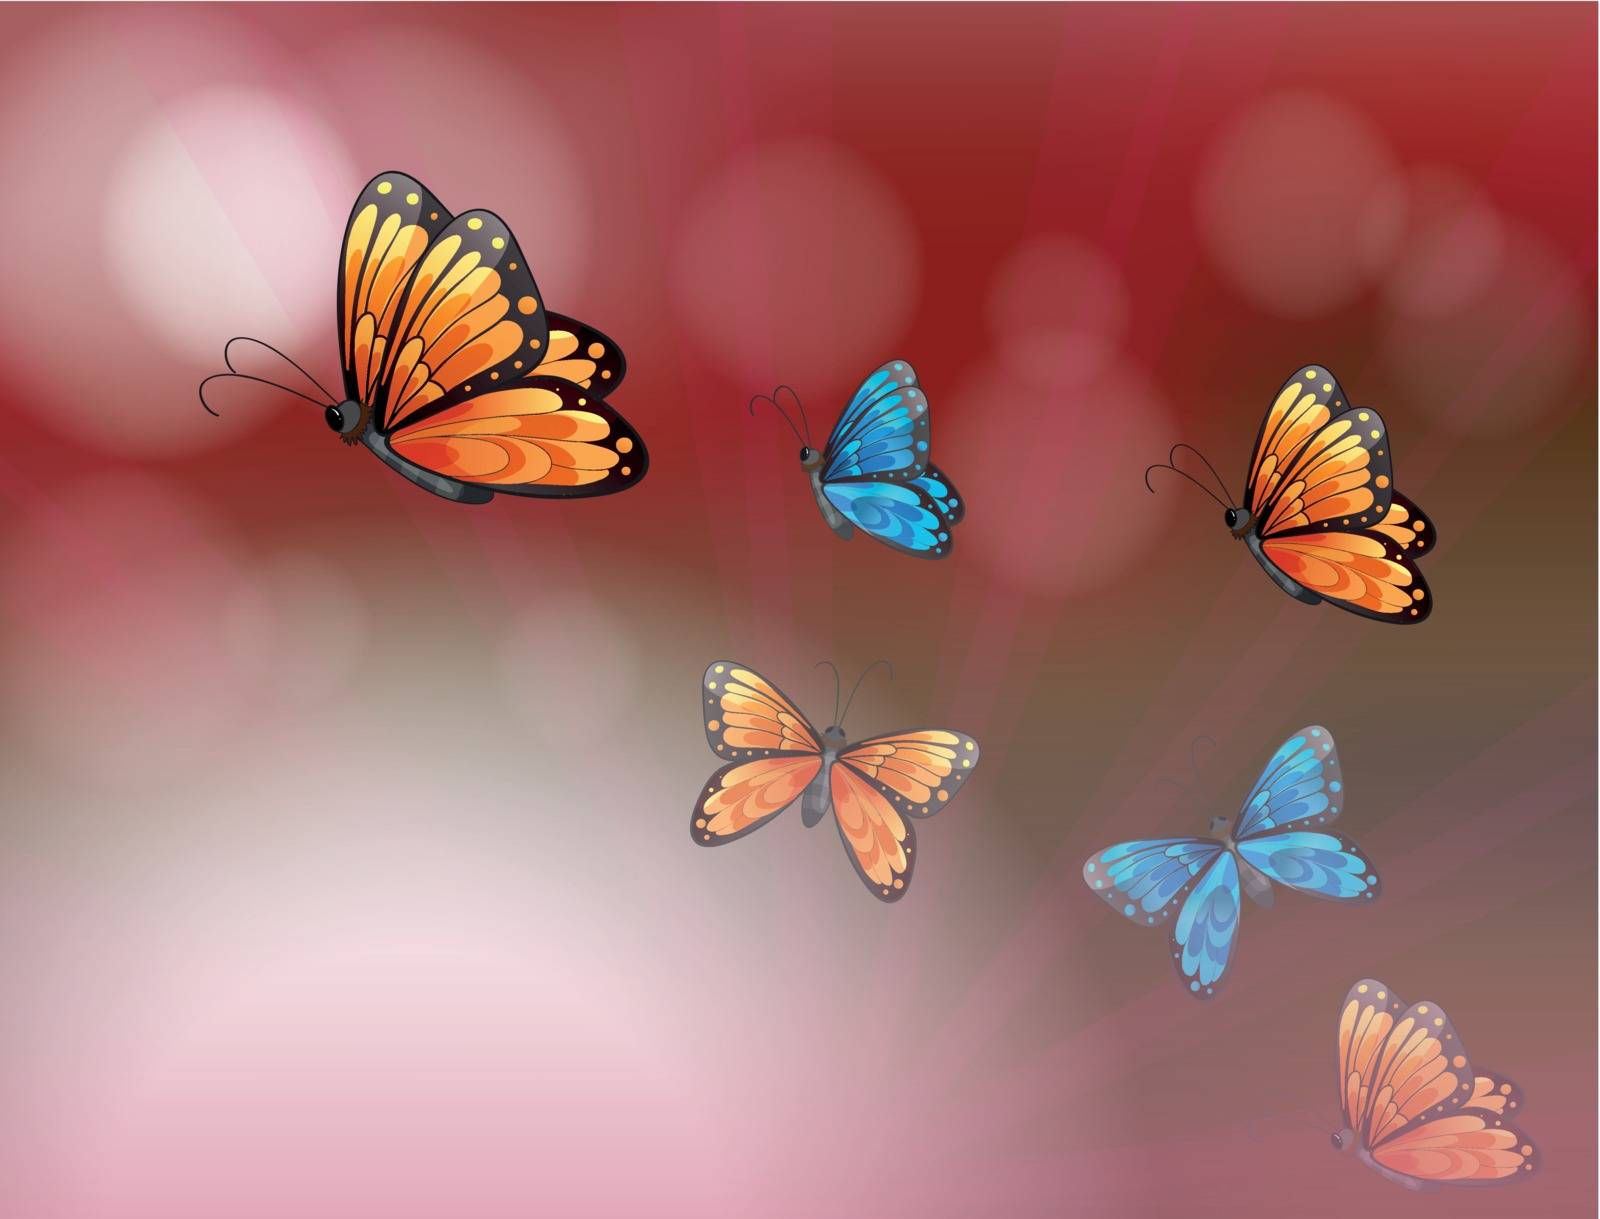 A paper with butterflies by iimages